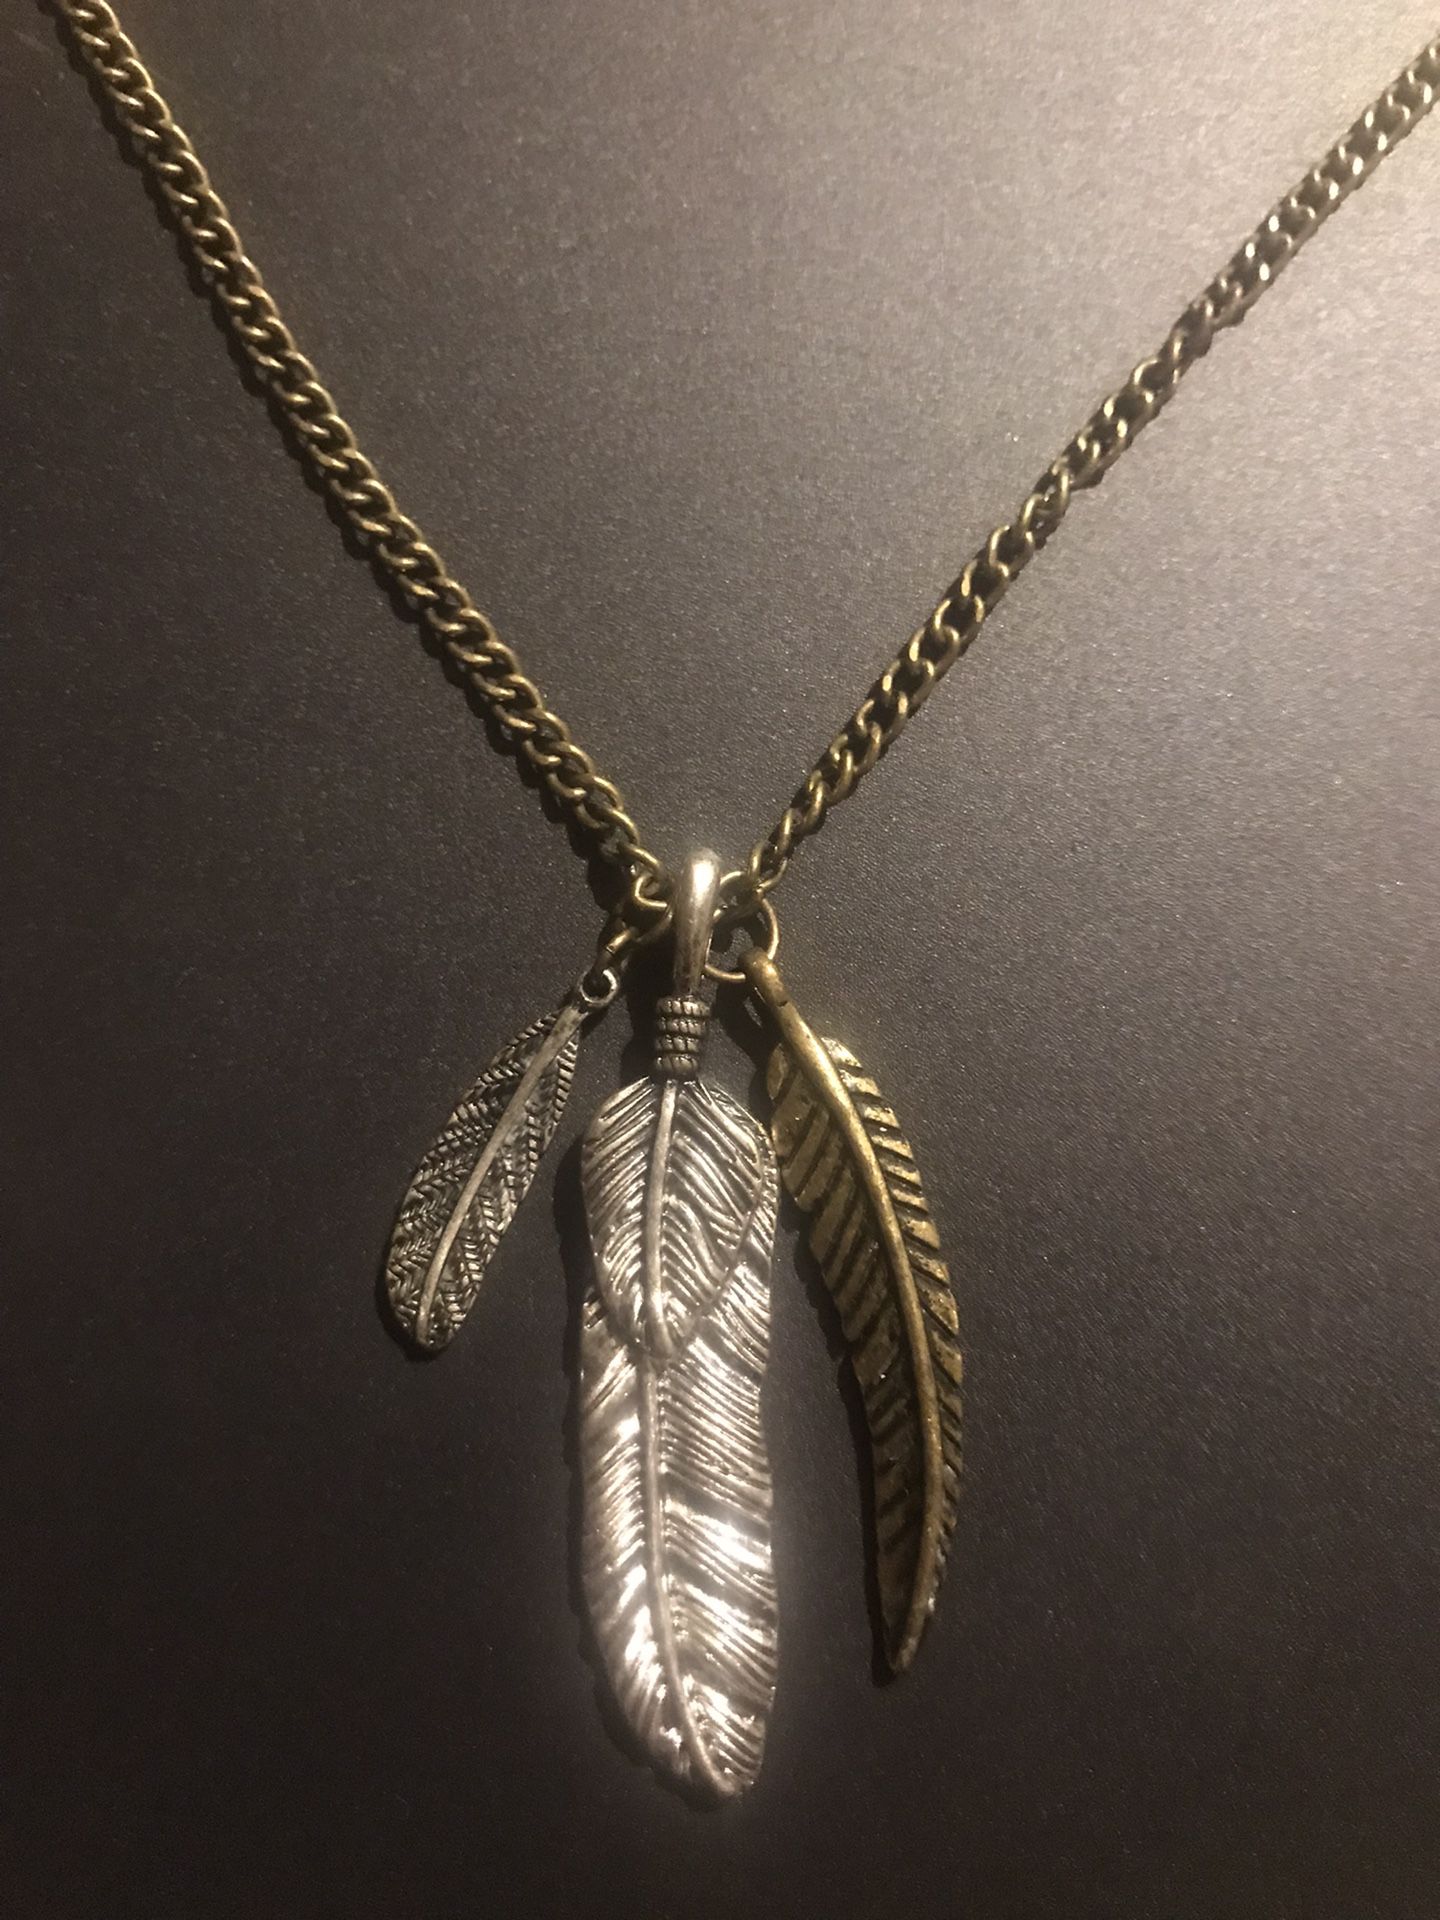 Silver and gold color long necklace with metal feathers